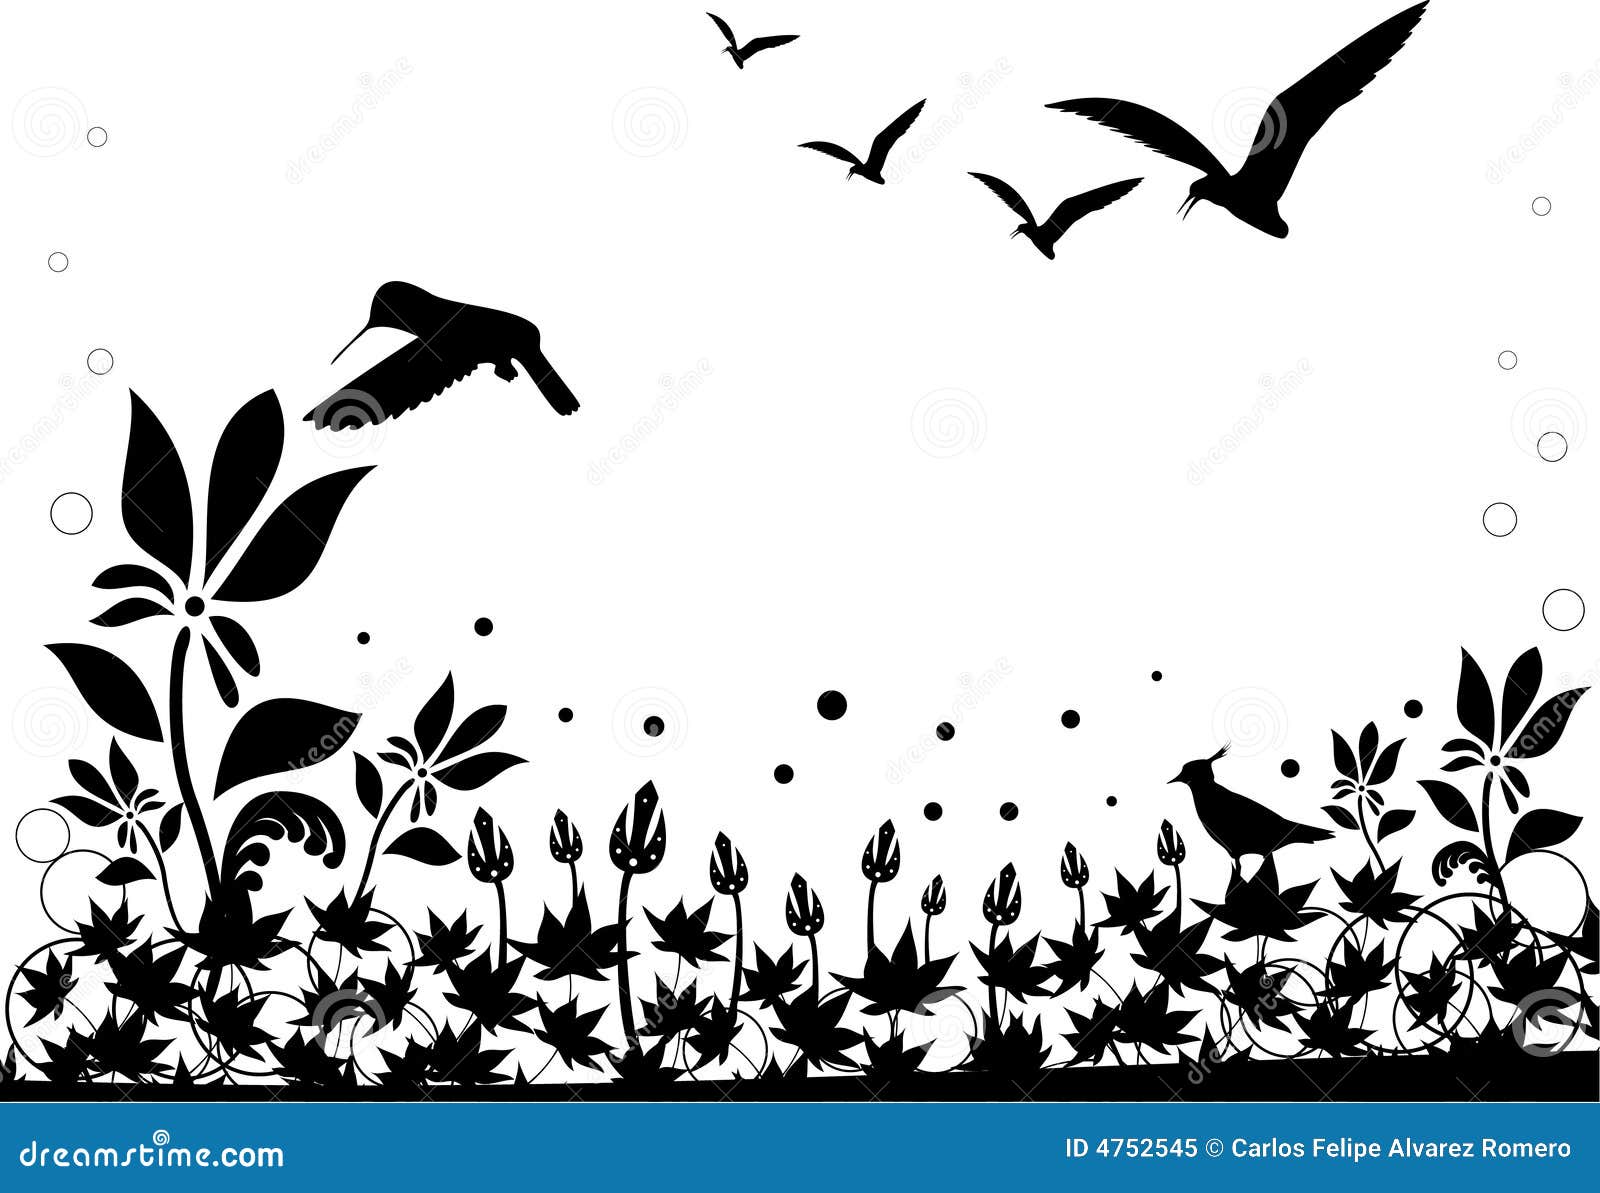 nature photography clipart - photo #27